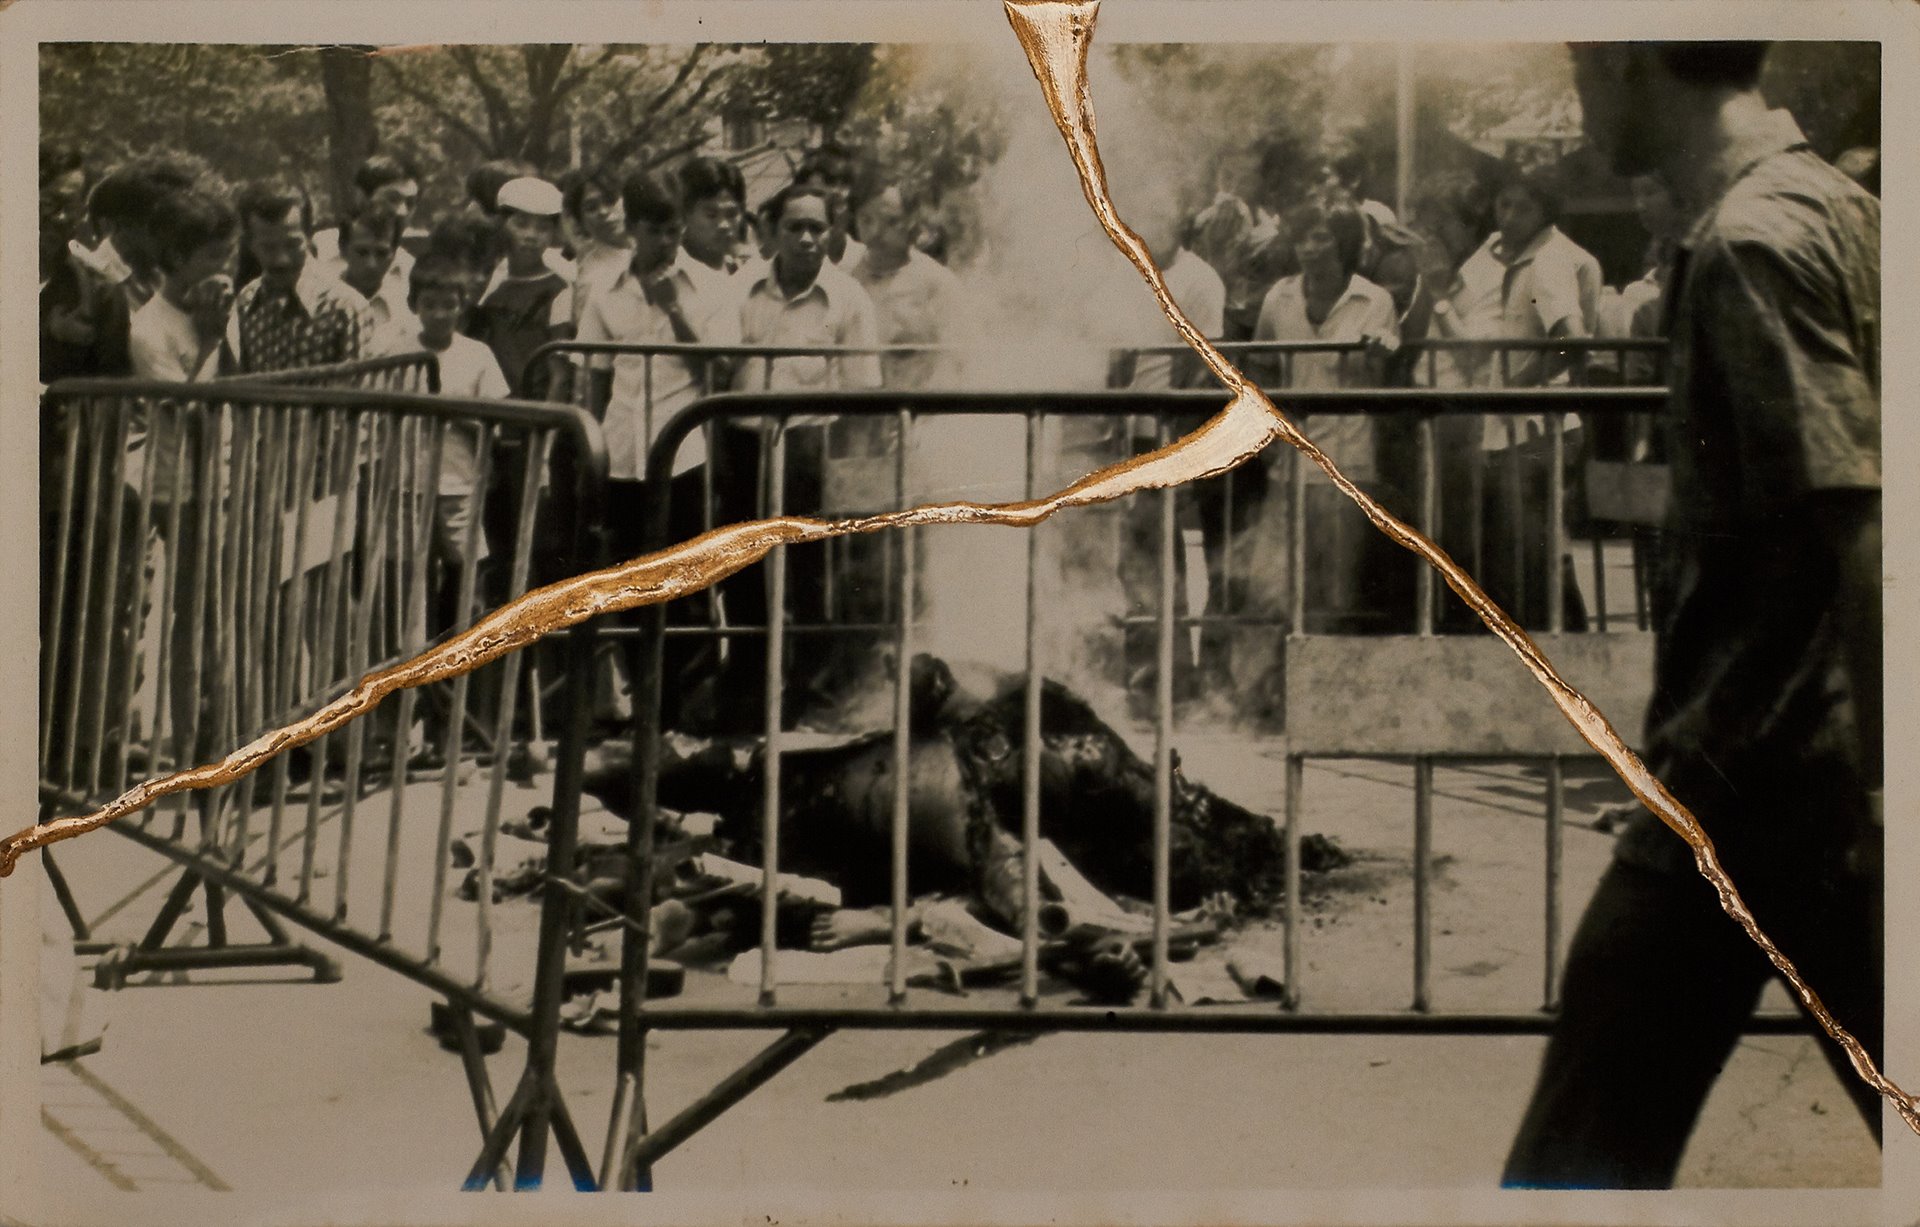 The bodies of protesters are burned during the 6 October 1976 massacre in Bangkok, Thailand.